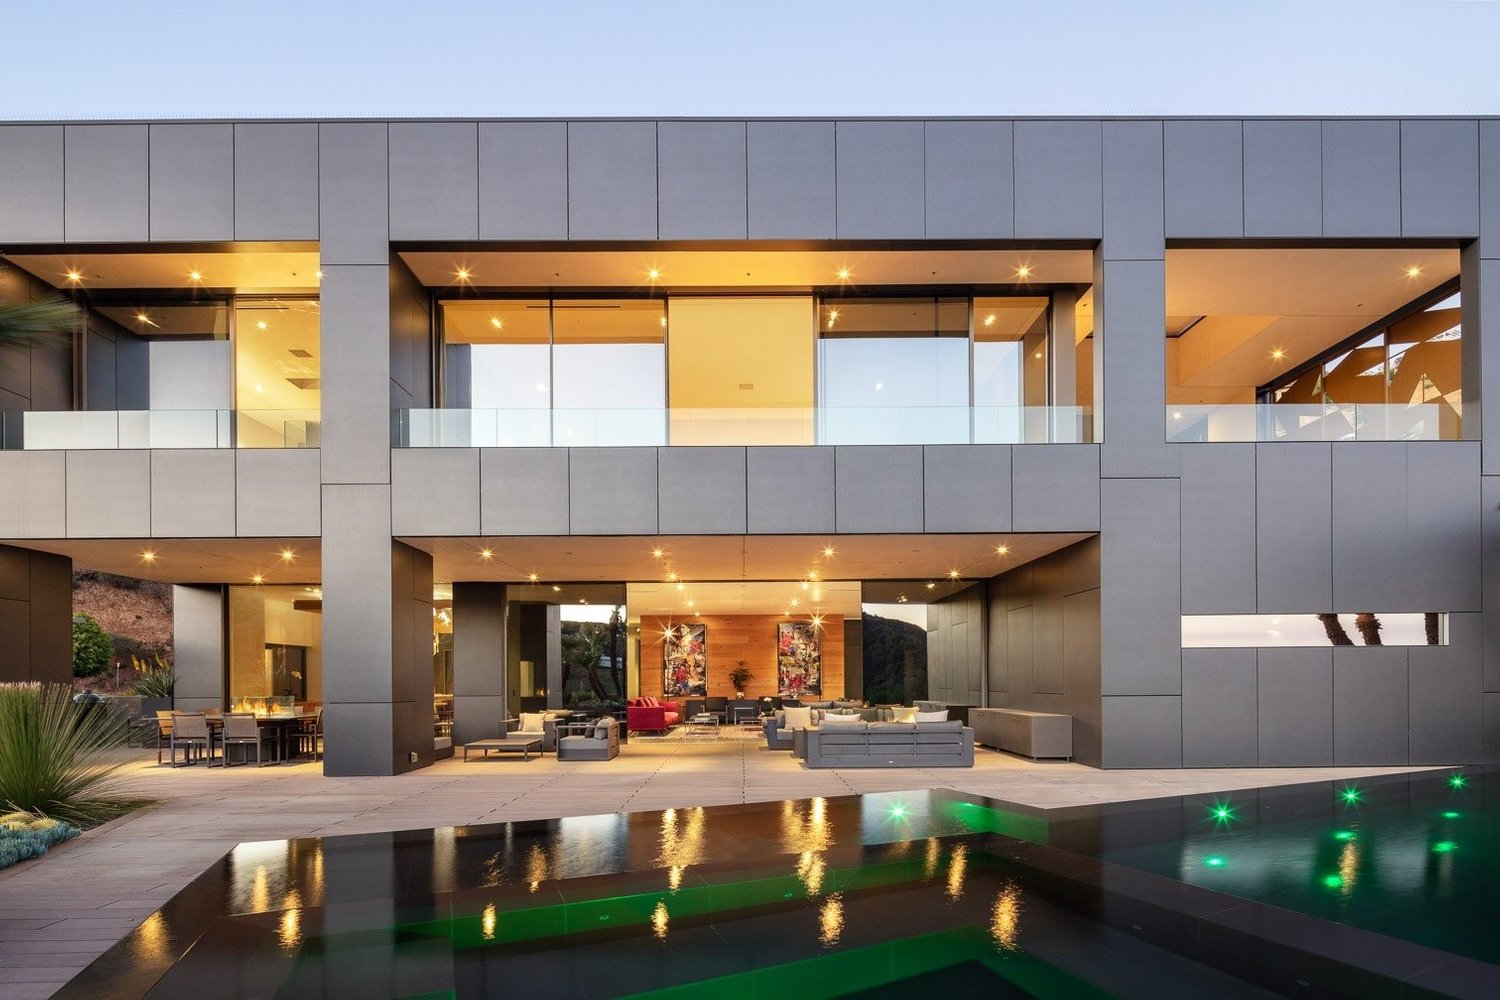 Eco-friendly Beverly Hills home owned by Gene Simmons of KISS